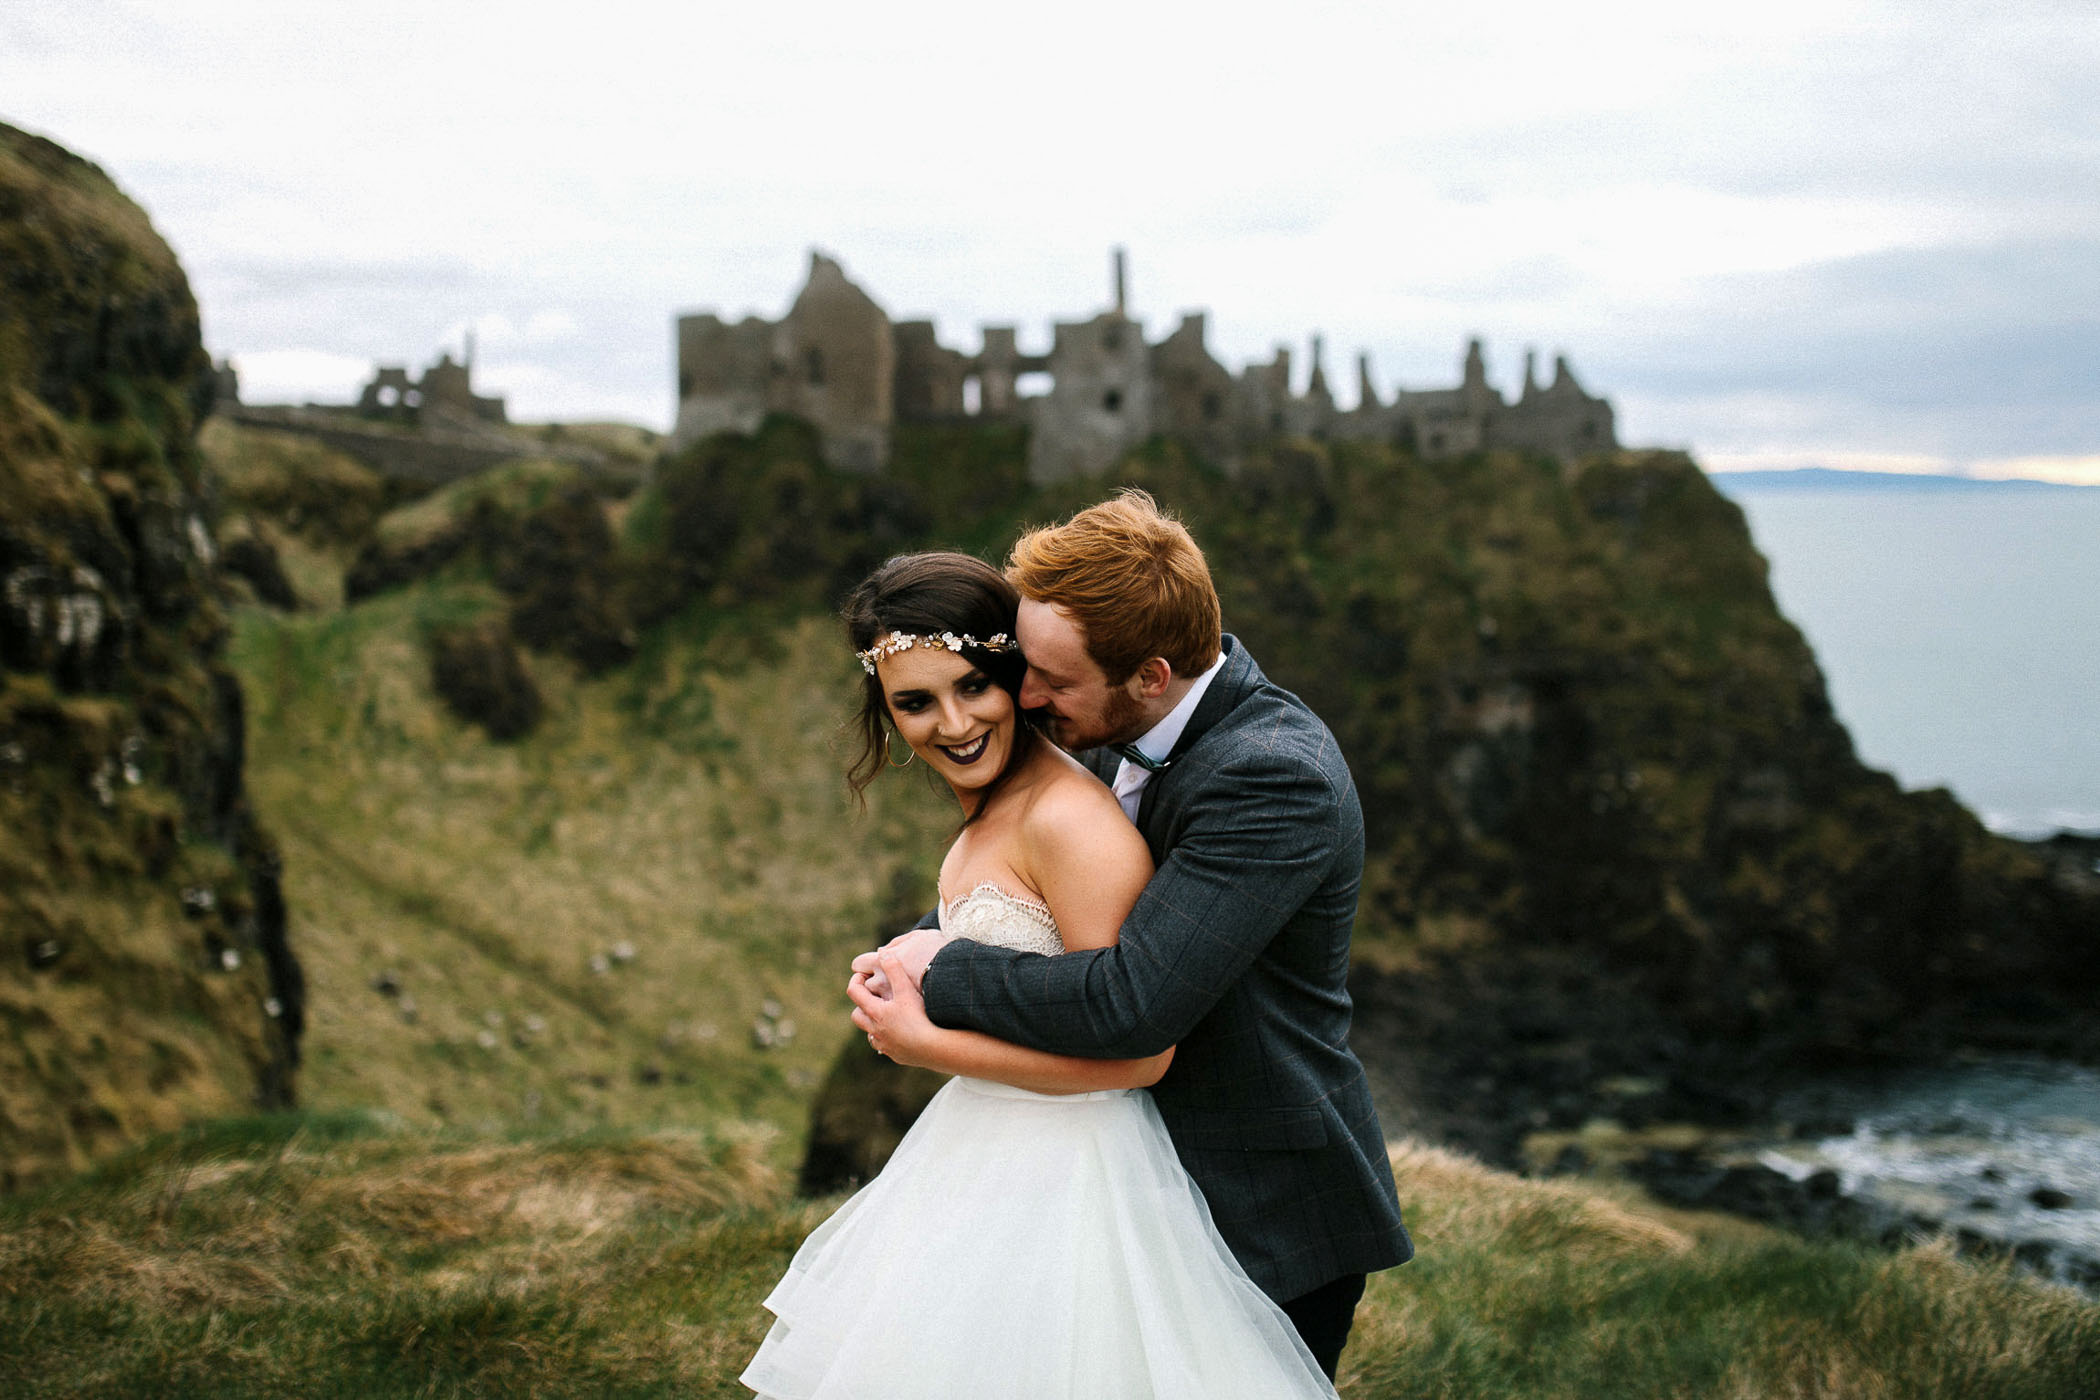 A bride and groom in the countryside near a ruined old building. She's smiling as he hugs her. By Luke Flint Photography